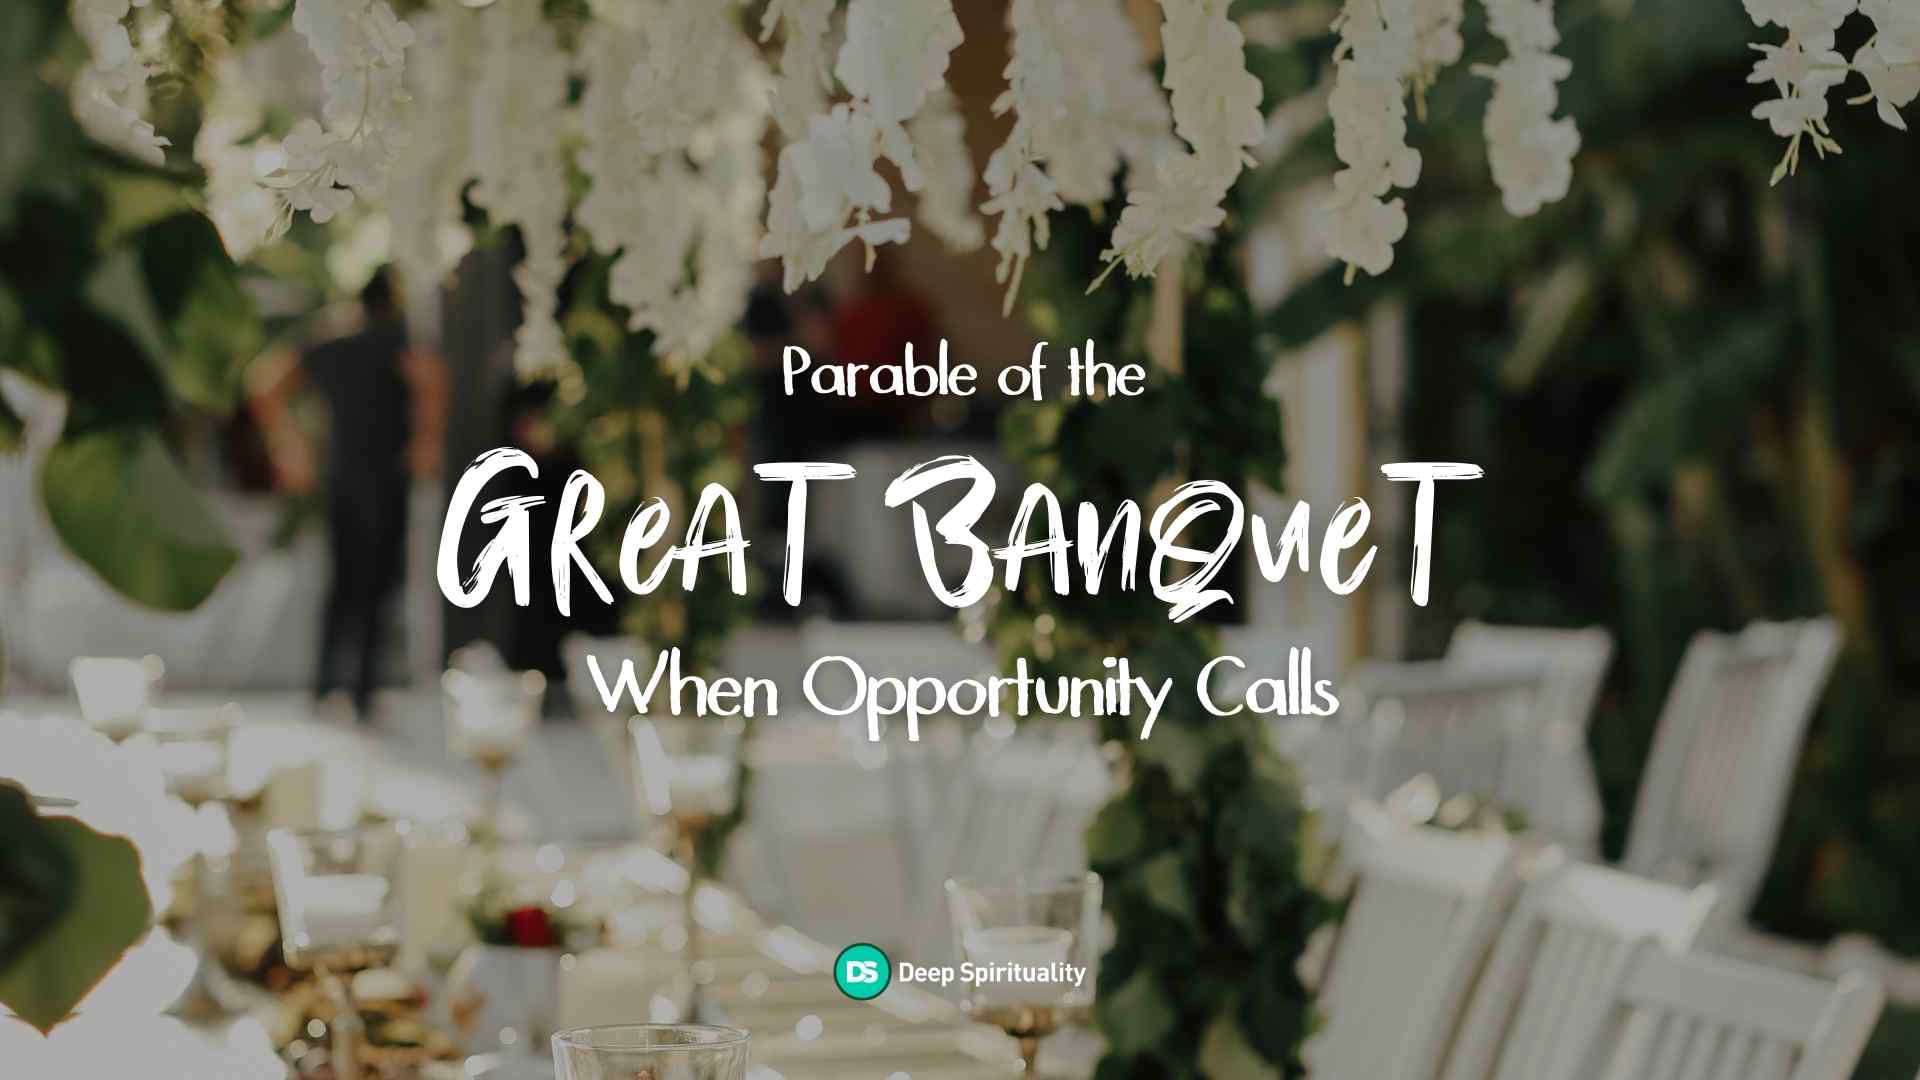 Parable of the Great Banquet: When Opportunity Calls 8